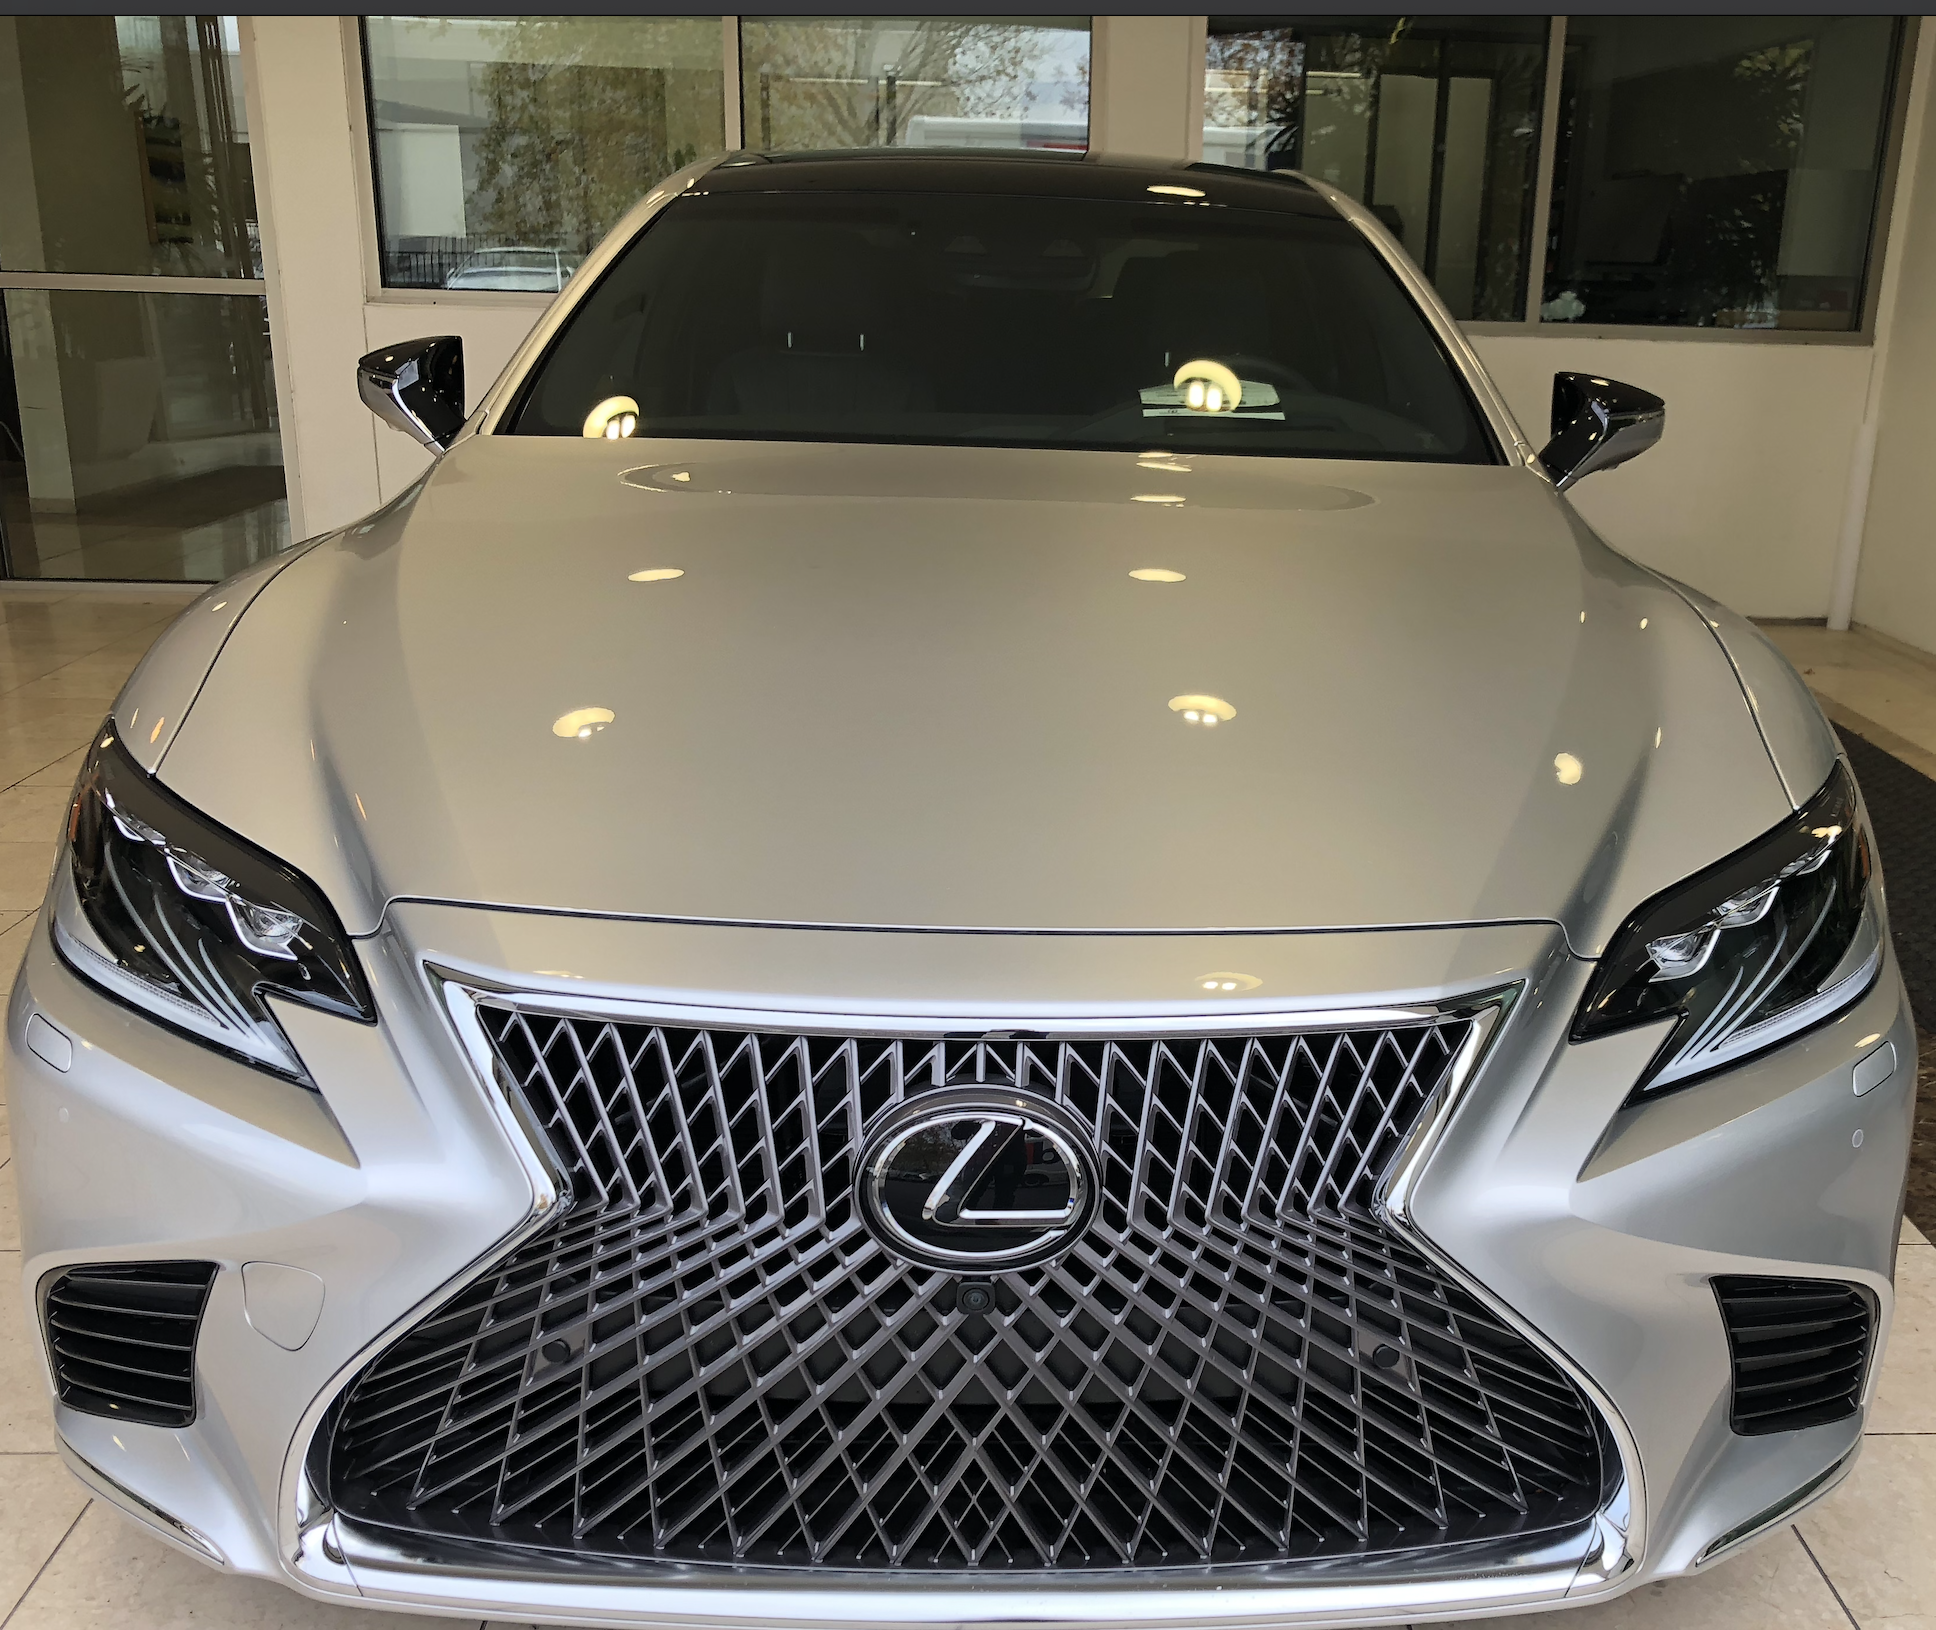 2018 Lexus LS500 - 2018 LS 500 Luxury Package, 830 Miles $102k MSRP **Lease Takeover or Buy** - Used - VIN JTHB5LFF9J5006440 - 830 Miles - 2WD - Automatic - Sedan - Silver - Bay Area, Milpitas, CA 95035, United States